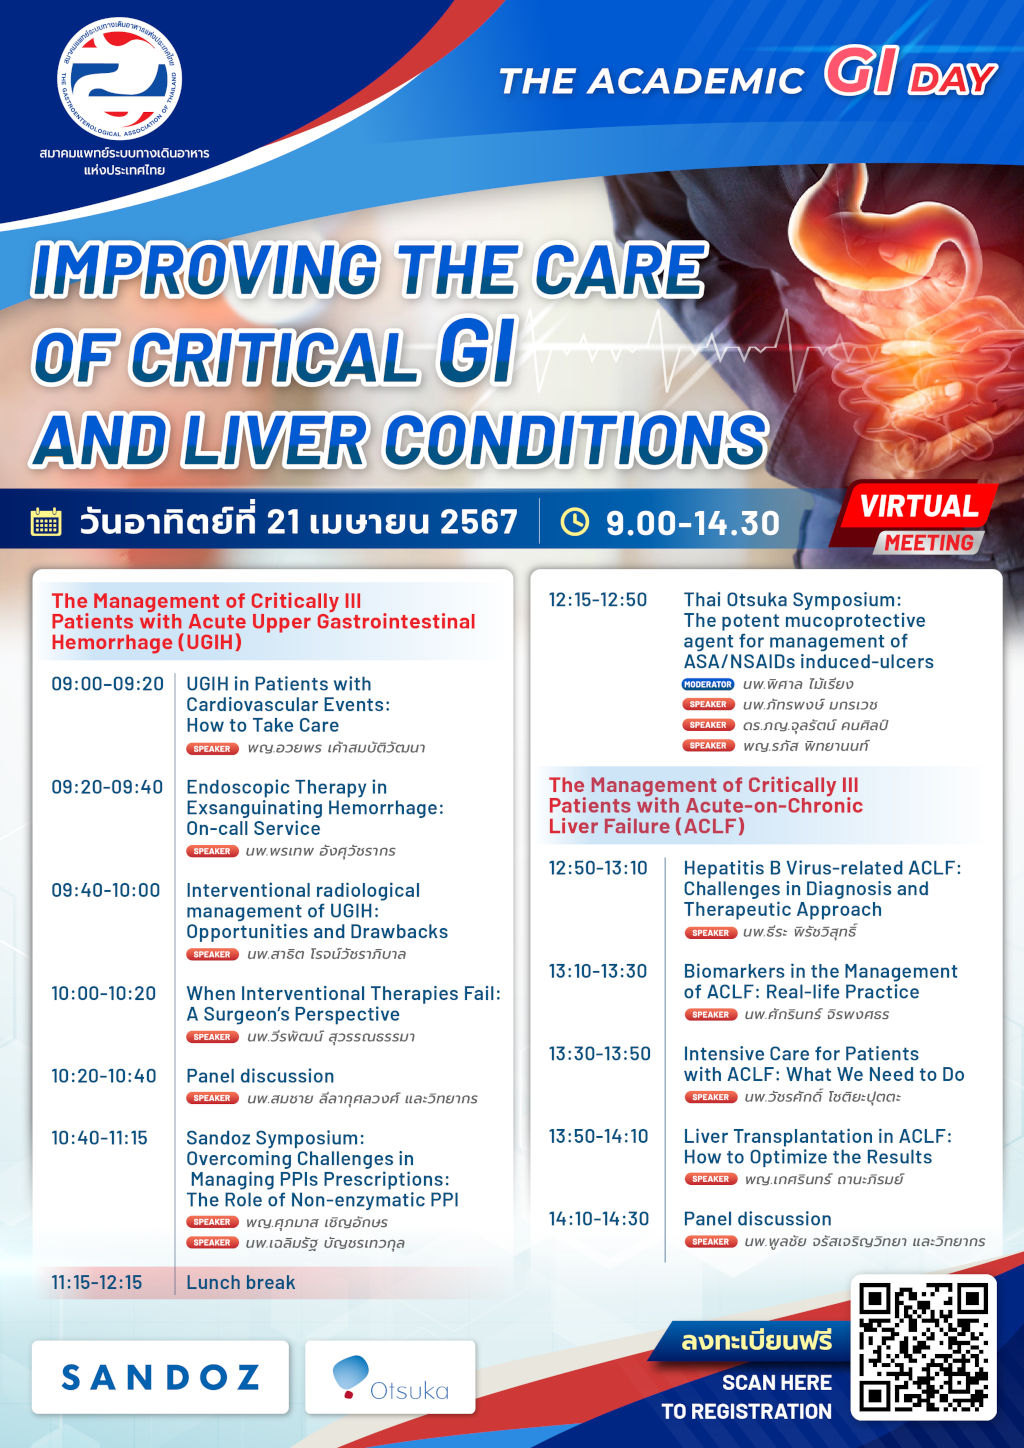 IMPROVING THE CARE OF CRITICAL GI AND LIVER CONDITIONS